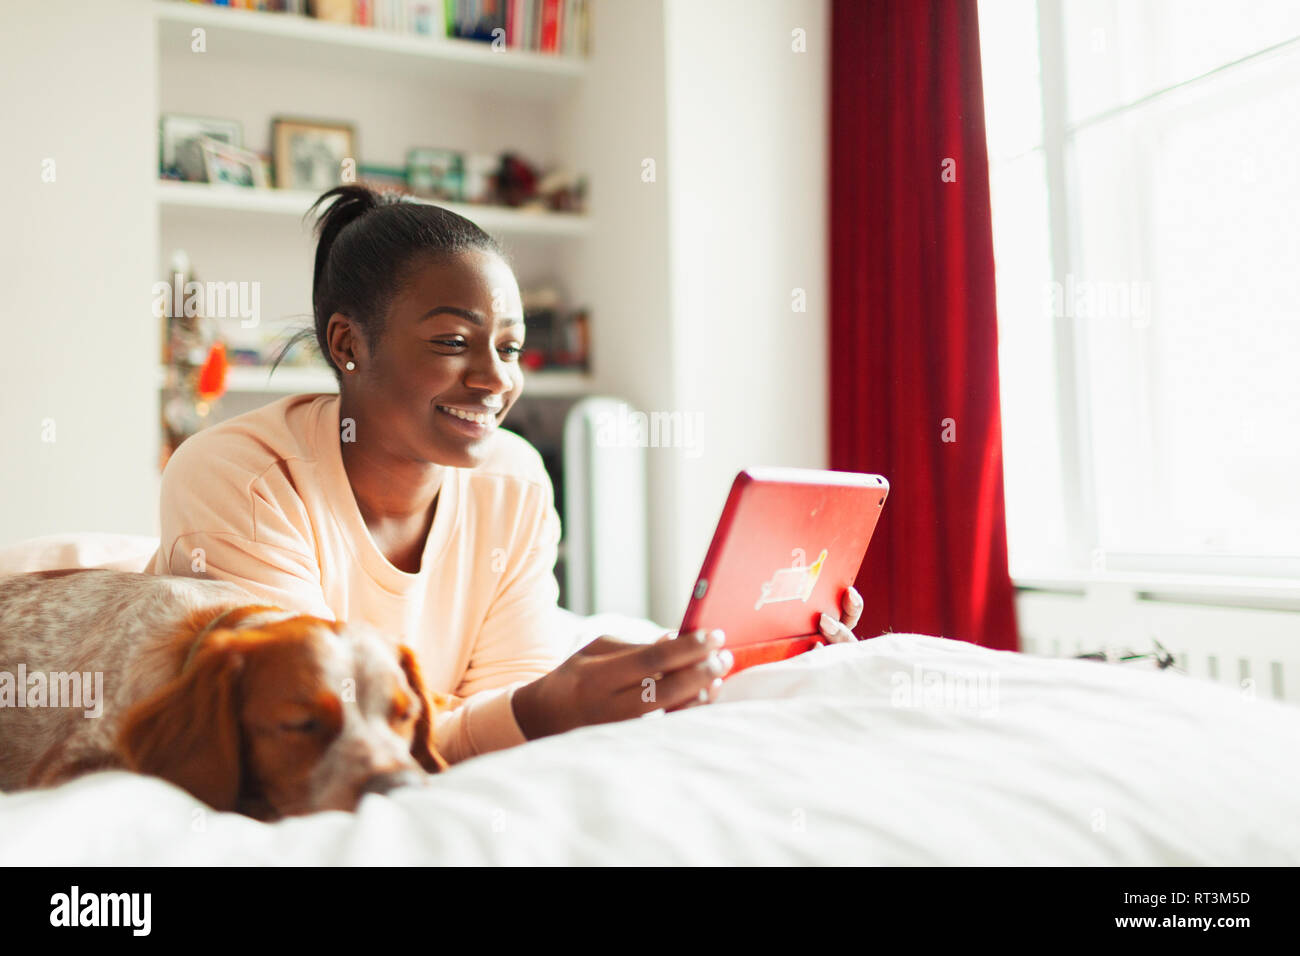 Smiling young woman using digital tablet next to sleeping dog on bed Stock Photo